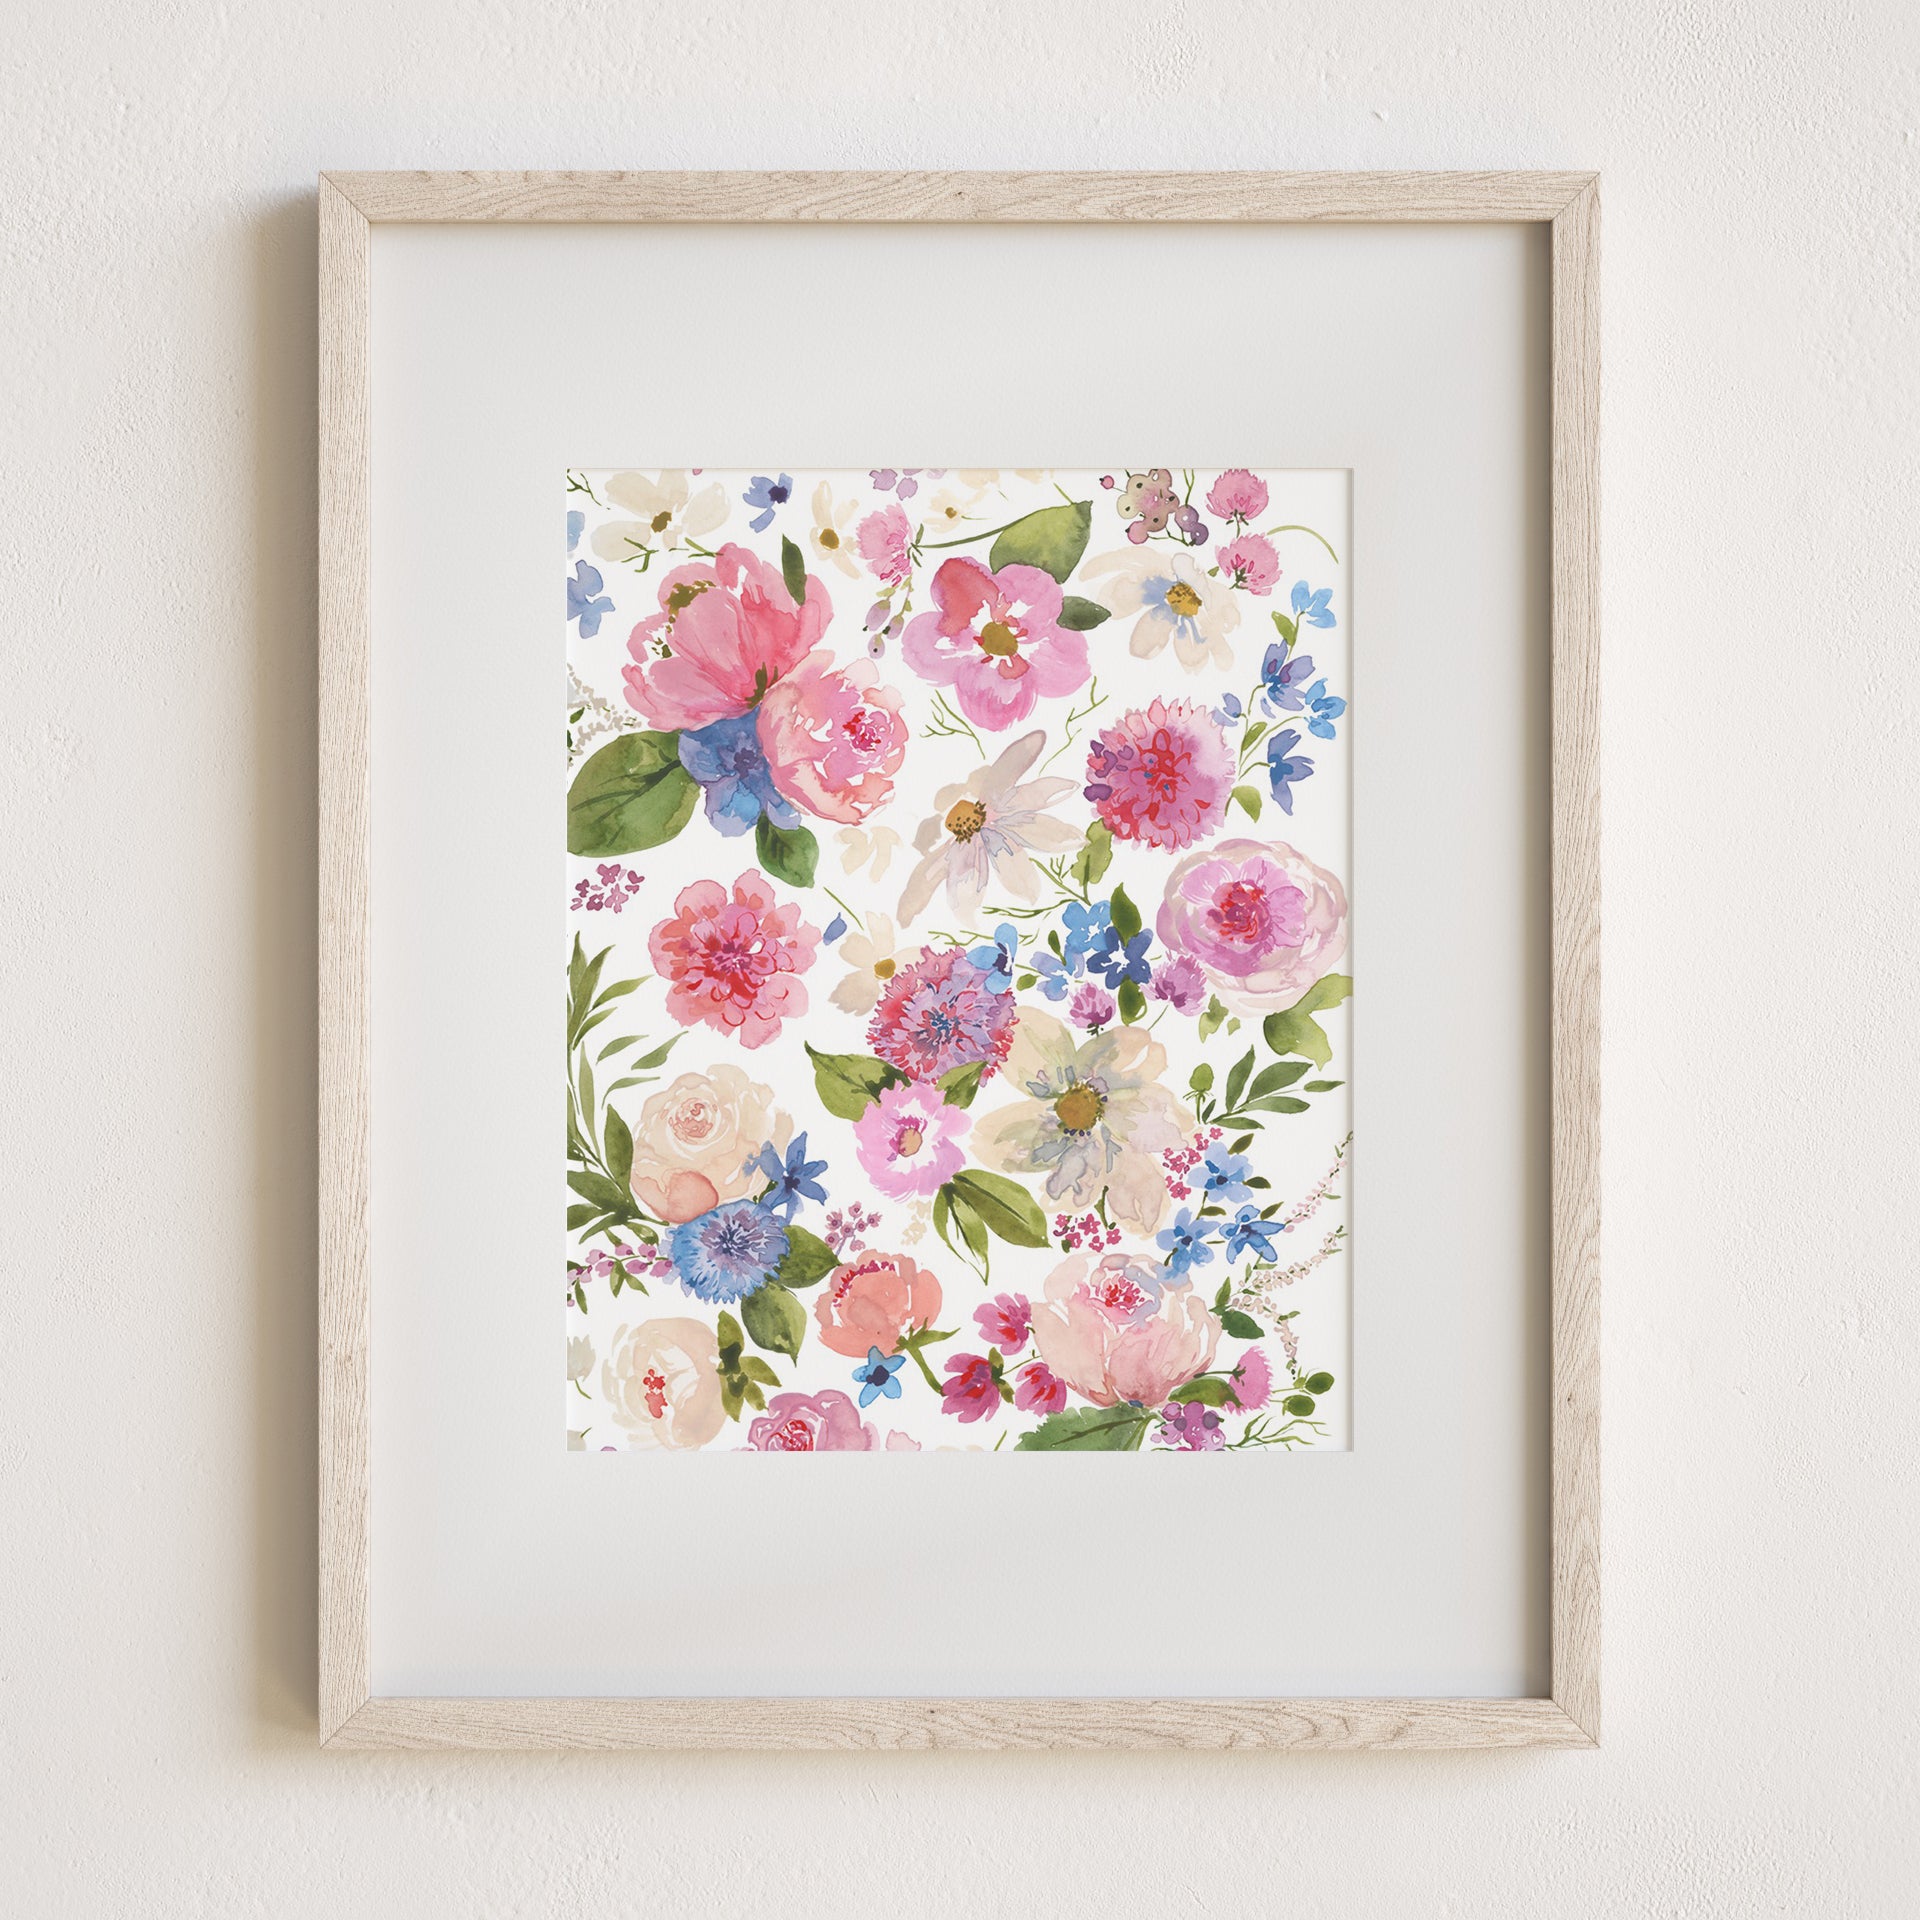 Love Art Print, 8x10" with mat and frame